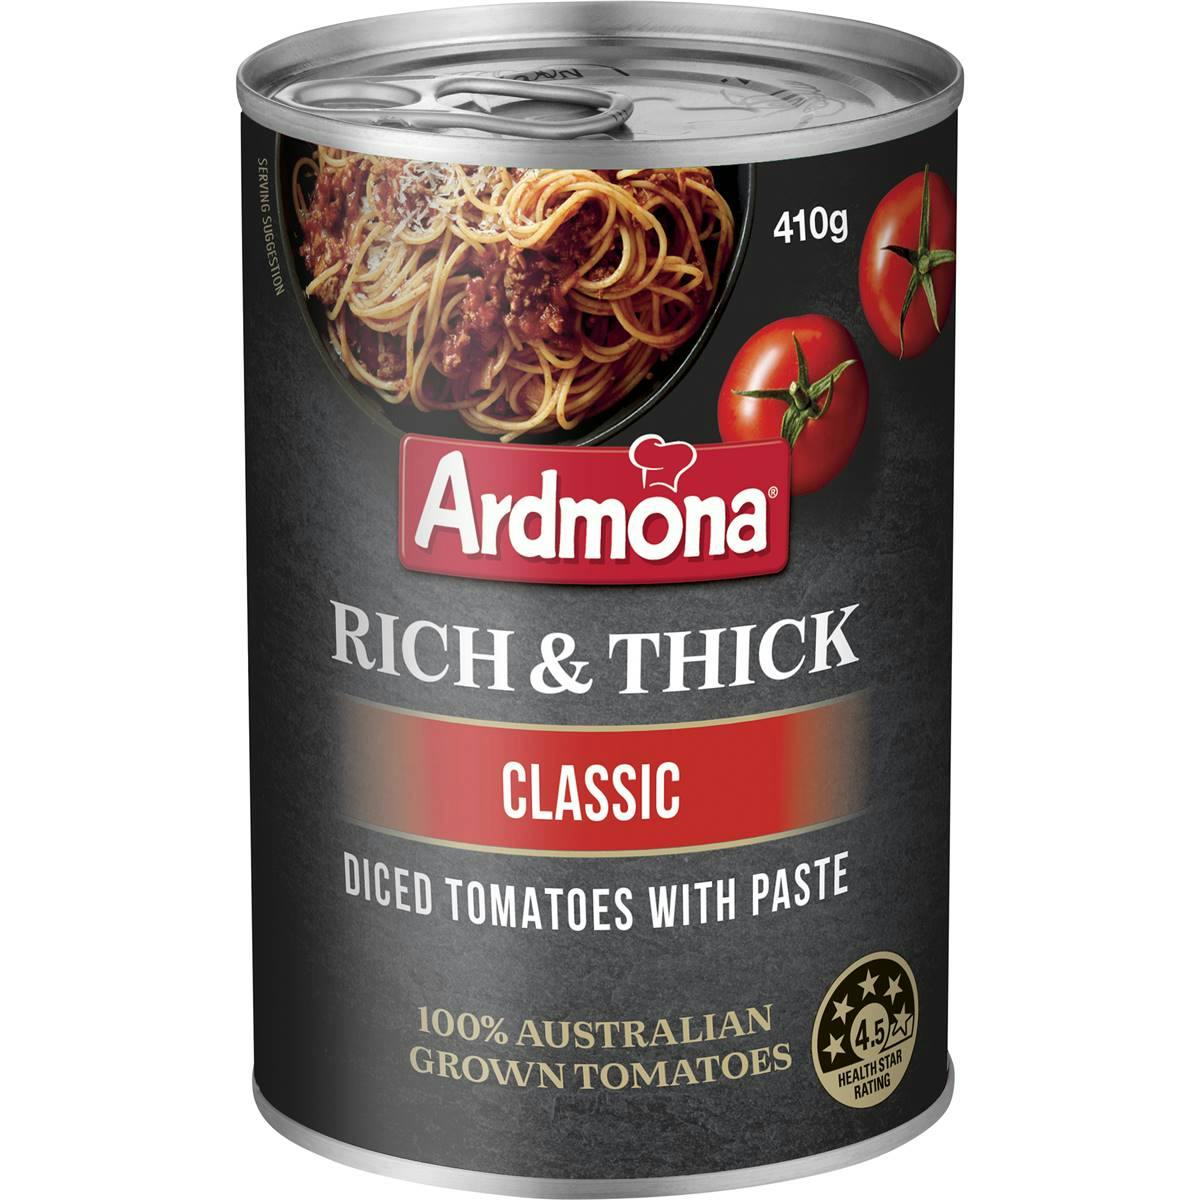 Ardmona Rich & Thick Diced Tomatoes With Paste Classic